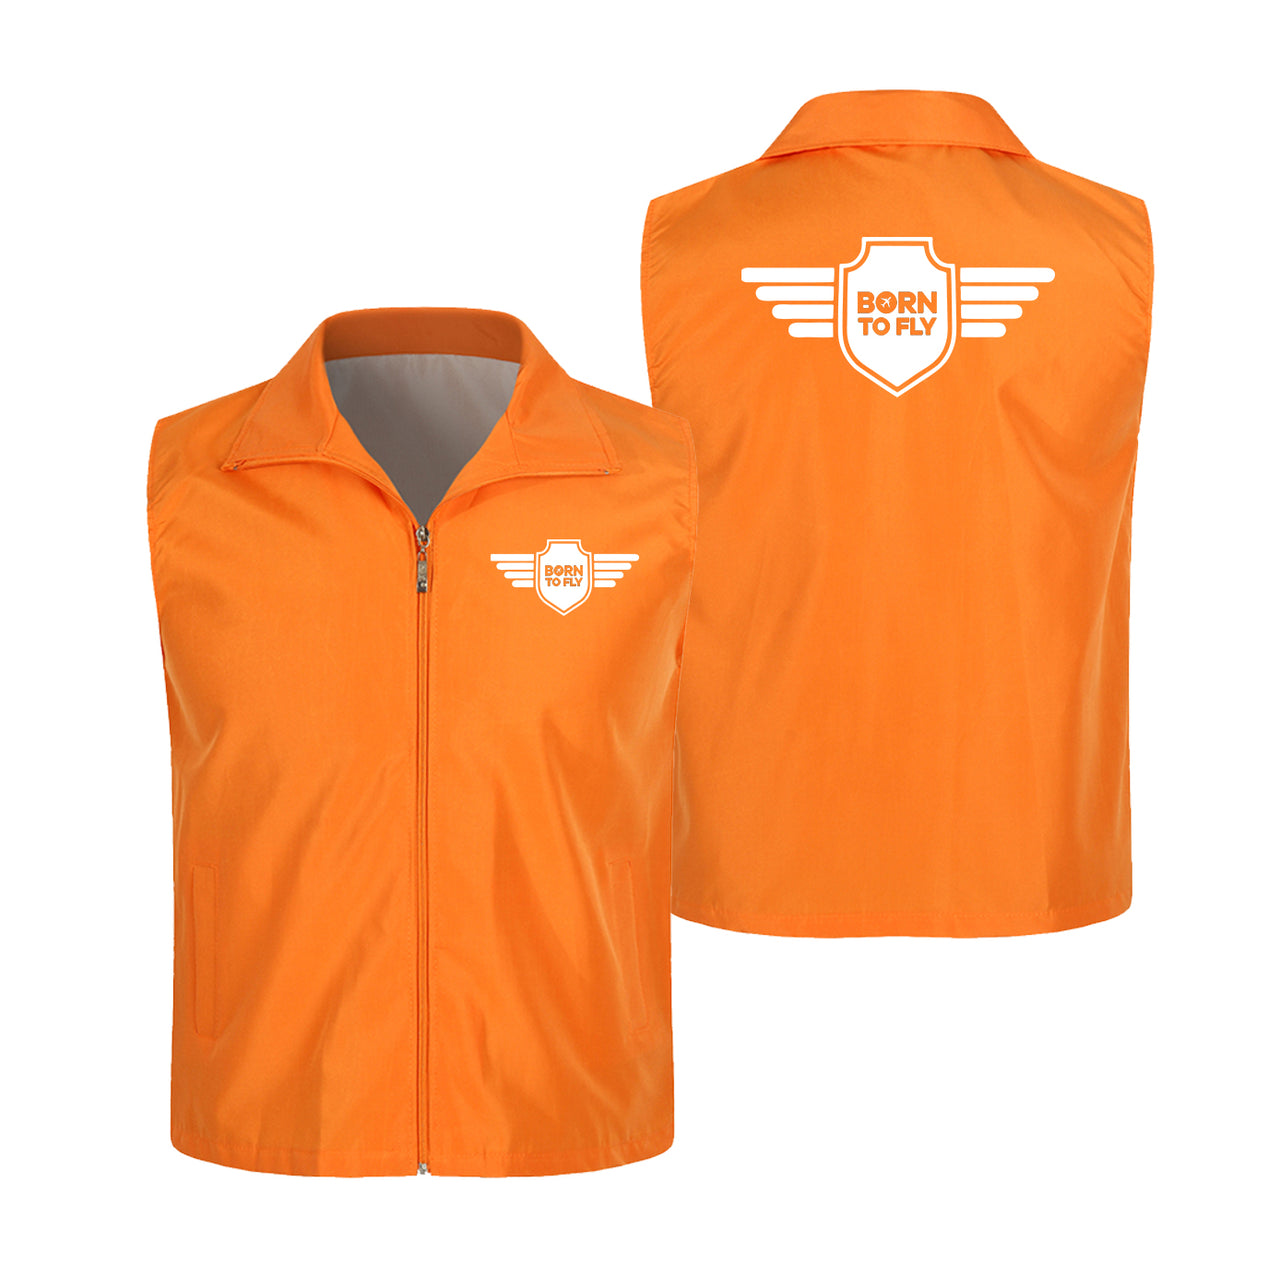 Born To Fly & Badge Designed Thin Style Vests